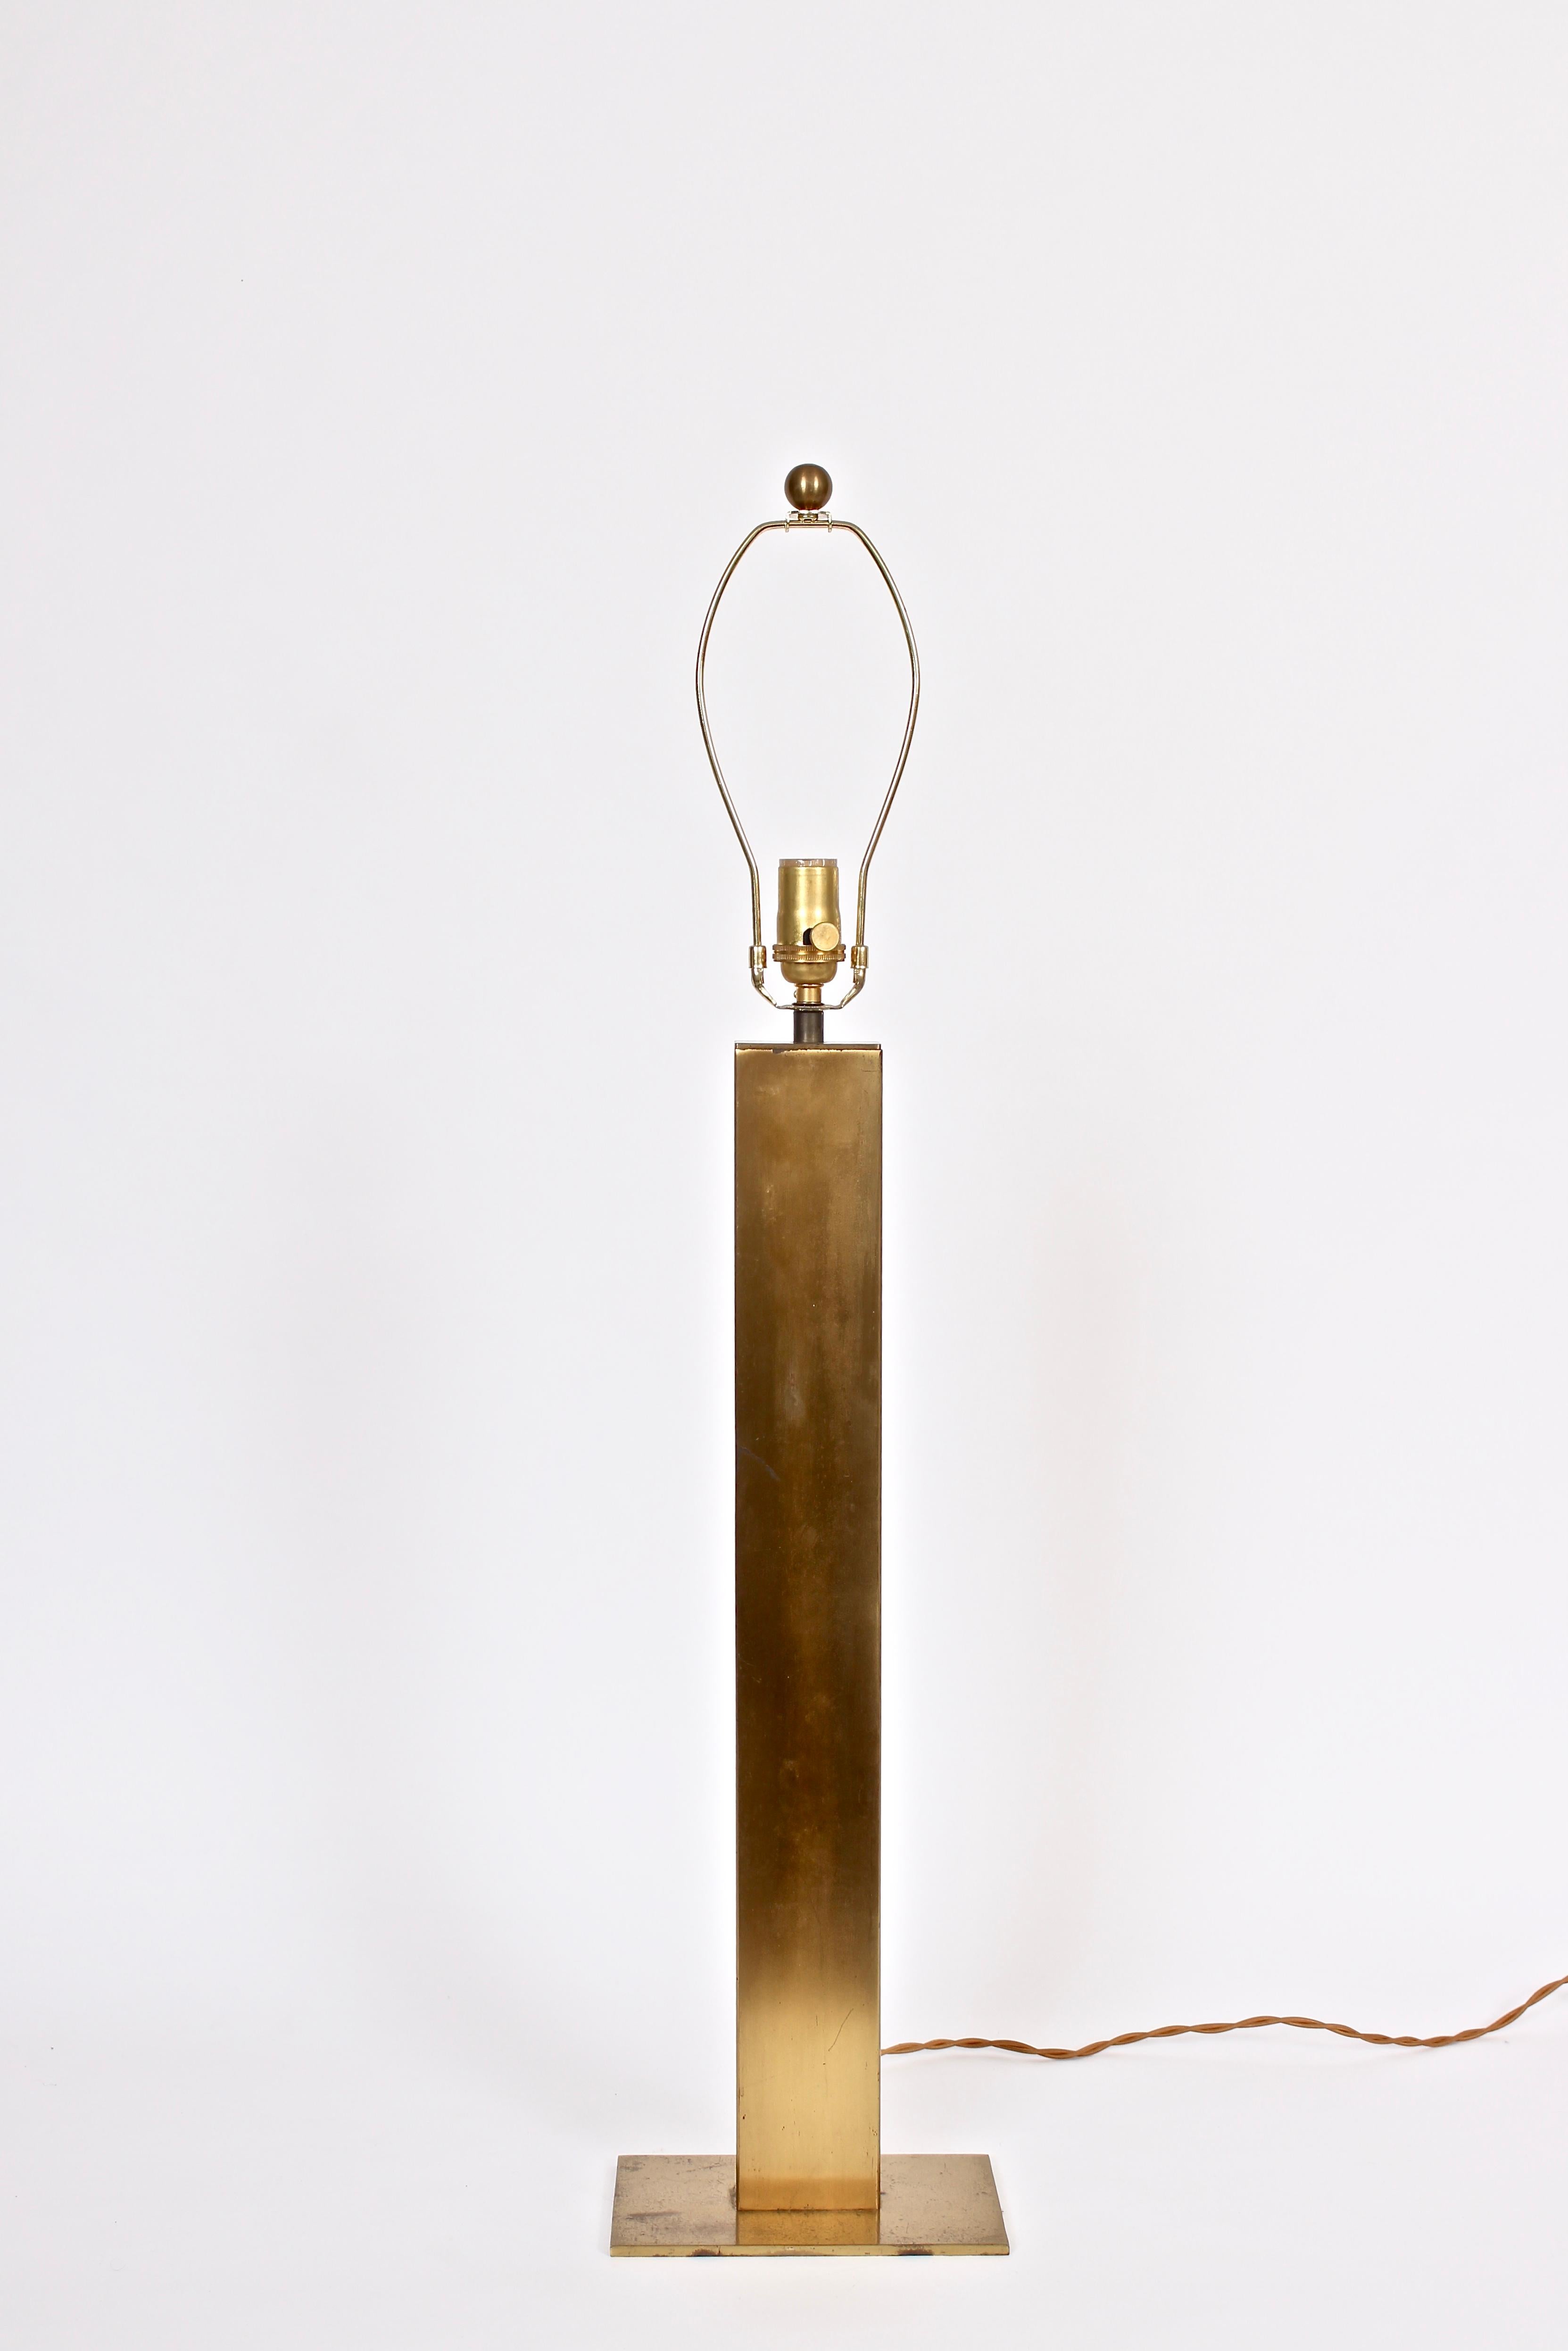 Tall George Kovacs Brass Tower Table Lamp. Featuring a three foot high rectangular, reflective, heavy brass plated column on rectangular base. Substantial with small footprint. Shade shown for display only (9H x 11D top x 16.5 D bottom). 28H to top